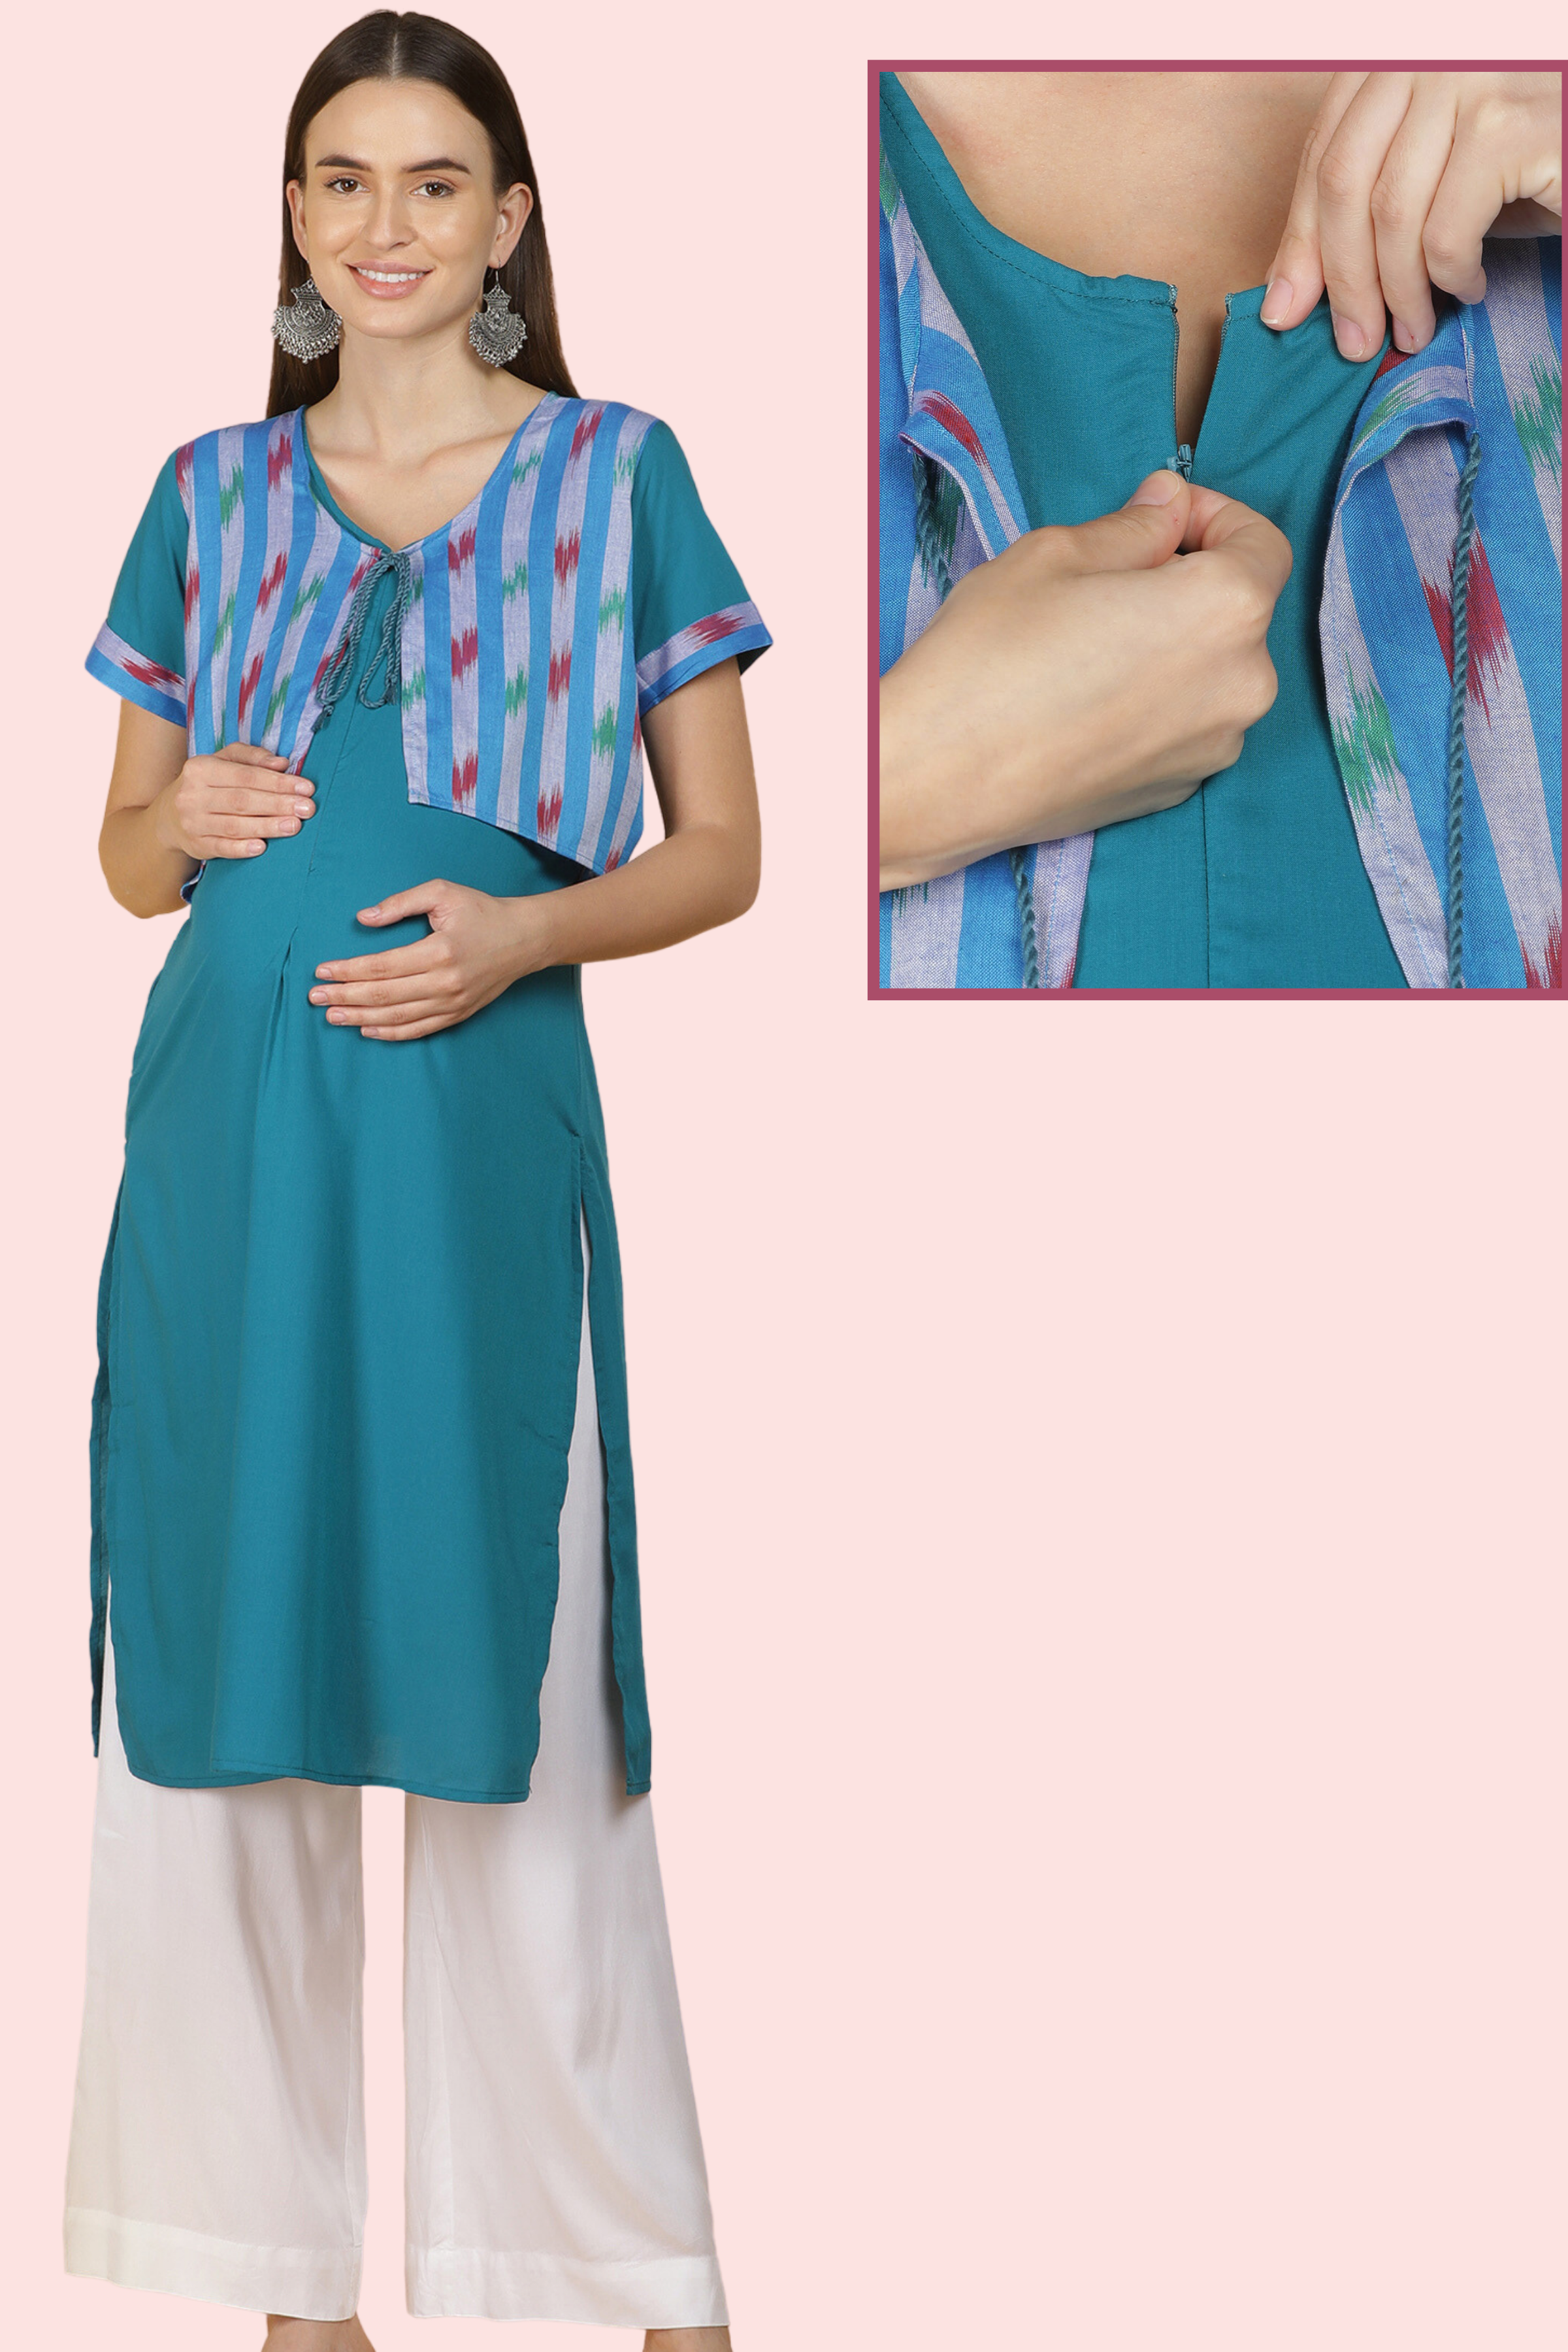 Ishta Feeding kurtis - Maternity / FEEDING KURTI WITH REMOVABLE JACKET WITH  *POCKET* Top: rayon JACKET:COTTON l-40 XL-42 XXL-44 Length 45-46 inches  *Two sides INVISIBLE zip* *650* SHIP EXTRA Gud quality fabric